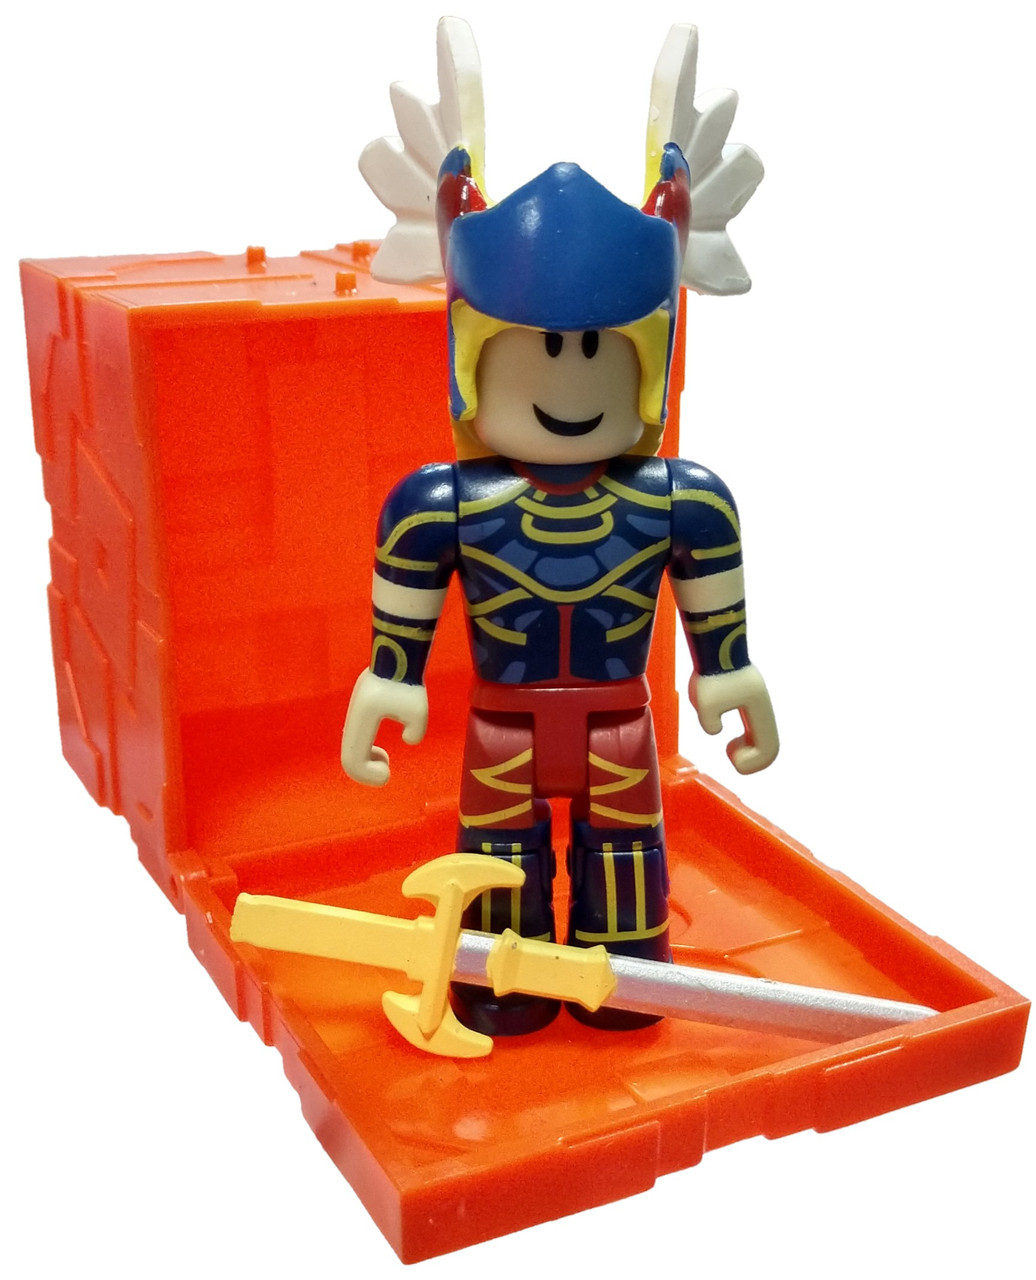 Roblox Valkyrie Toy Code Collector S Guide Roblox Toys Roblox Jailbreak Vehicle Toy How To Get 90000 Robux - roblox orange box toys chaser codes